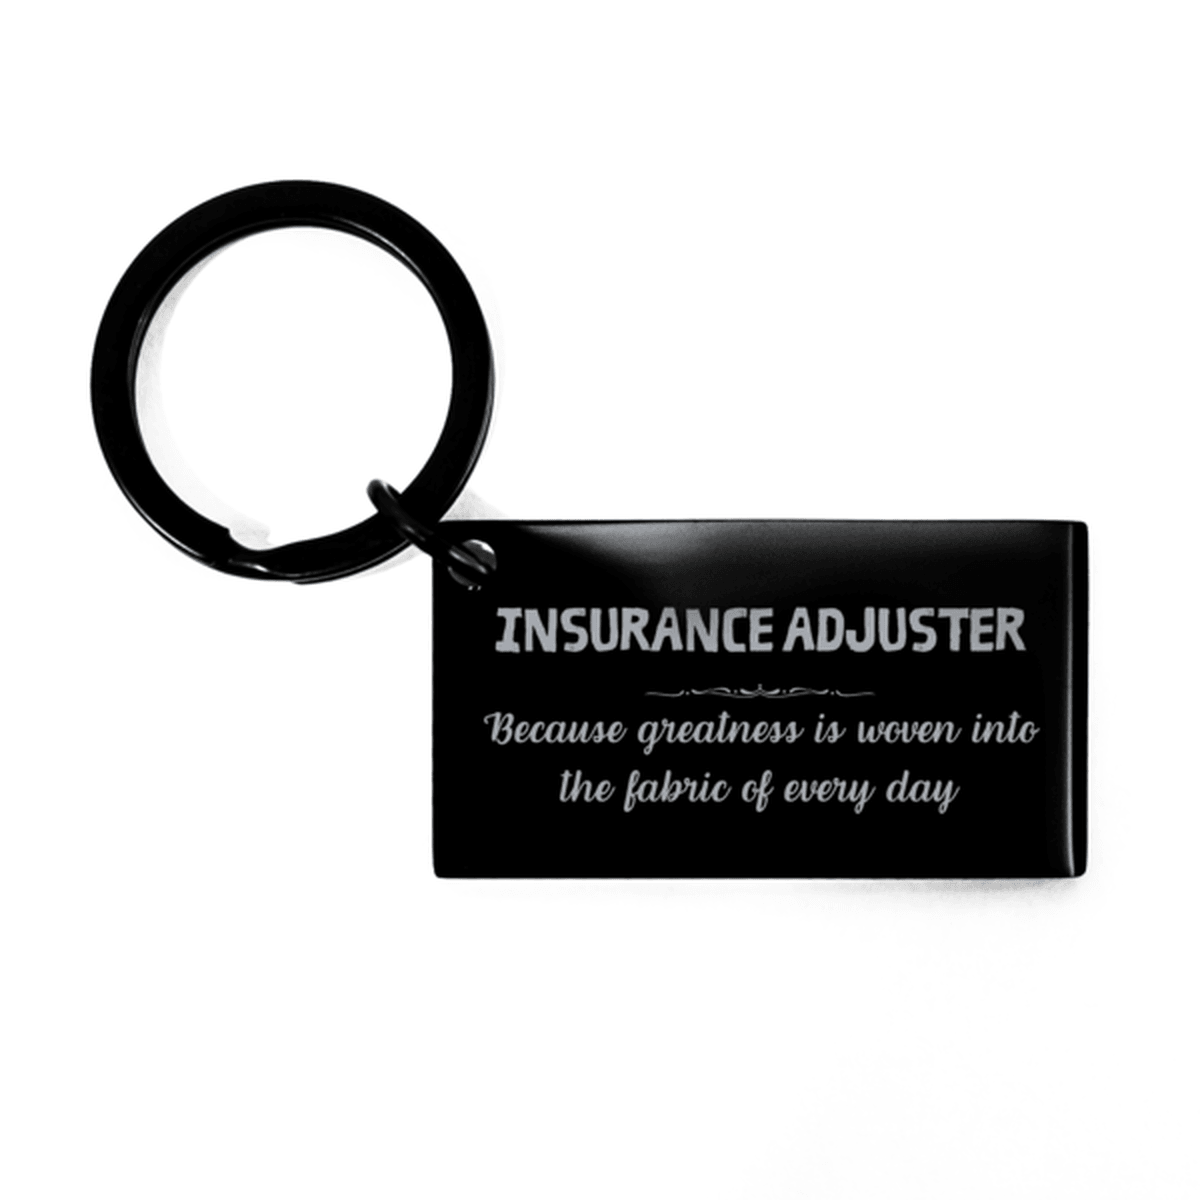 Sarcastic Insurance Adjuster Keychain Gifts, Christmas Holiday Gifts for Insurance Adjuster Birthday, Insurance Adjuster: Because greatness is woven into the fabric of every day, Coworkers, Friends - Mallard Moon Gift Shop